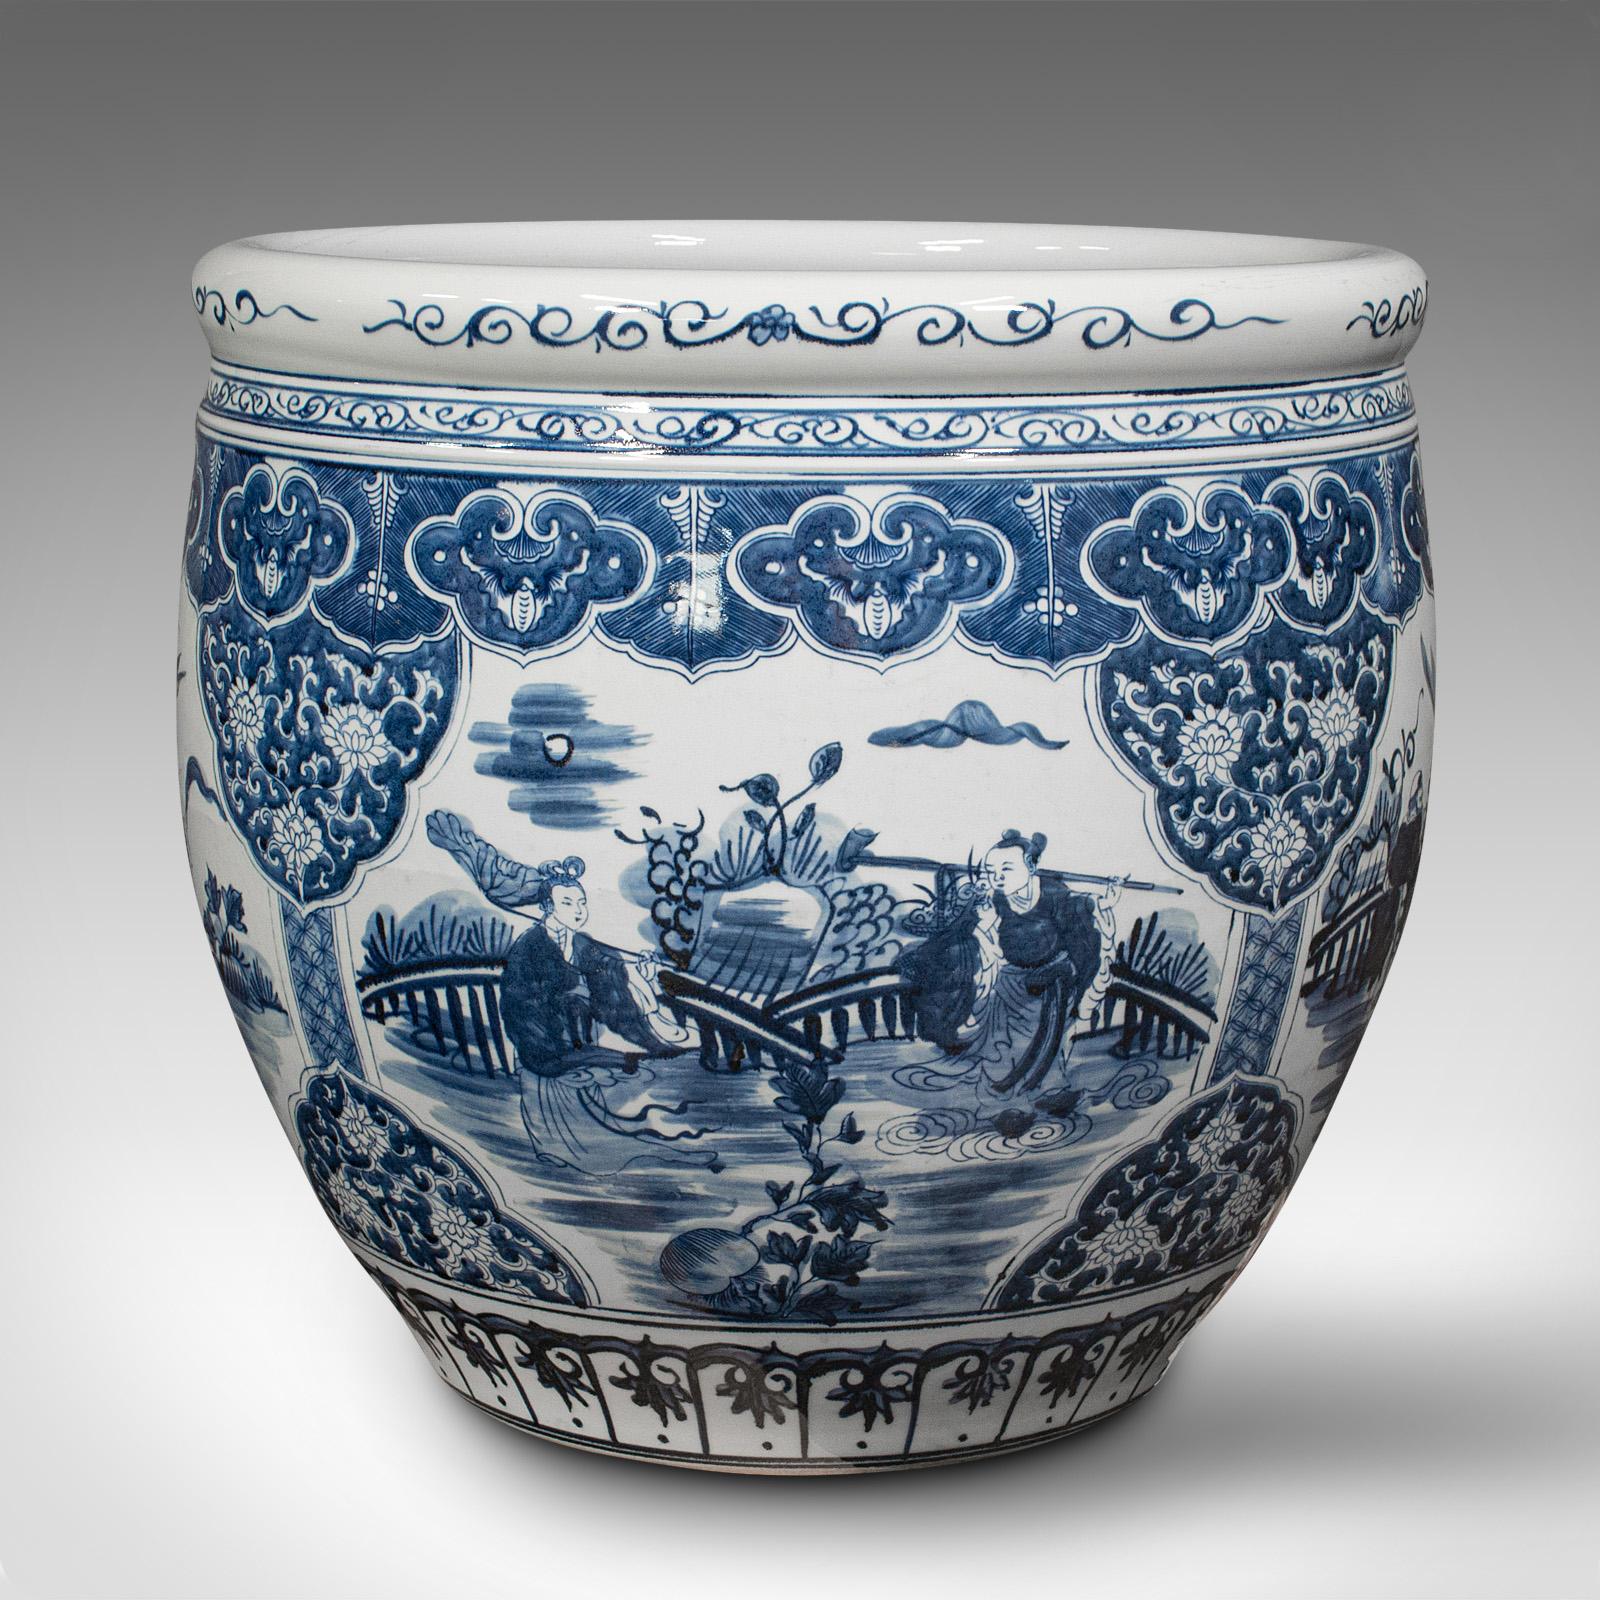 This is a huge vintage decorative planter. A Chinese, ceramic jardiniere pot with classic white and blue decor, dating to the late 20th century, circa 1980.

Impressive proportion with a large canvas for the decorative Oriental panels.
Displays a